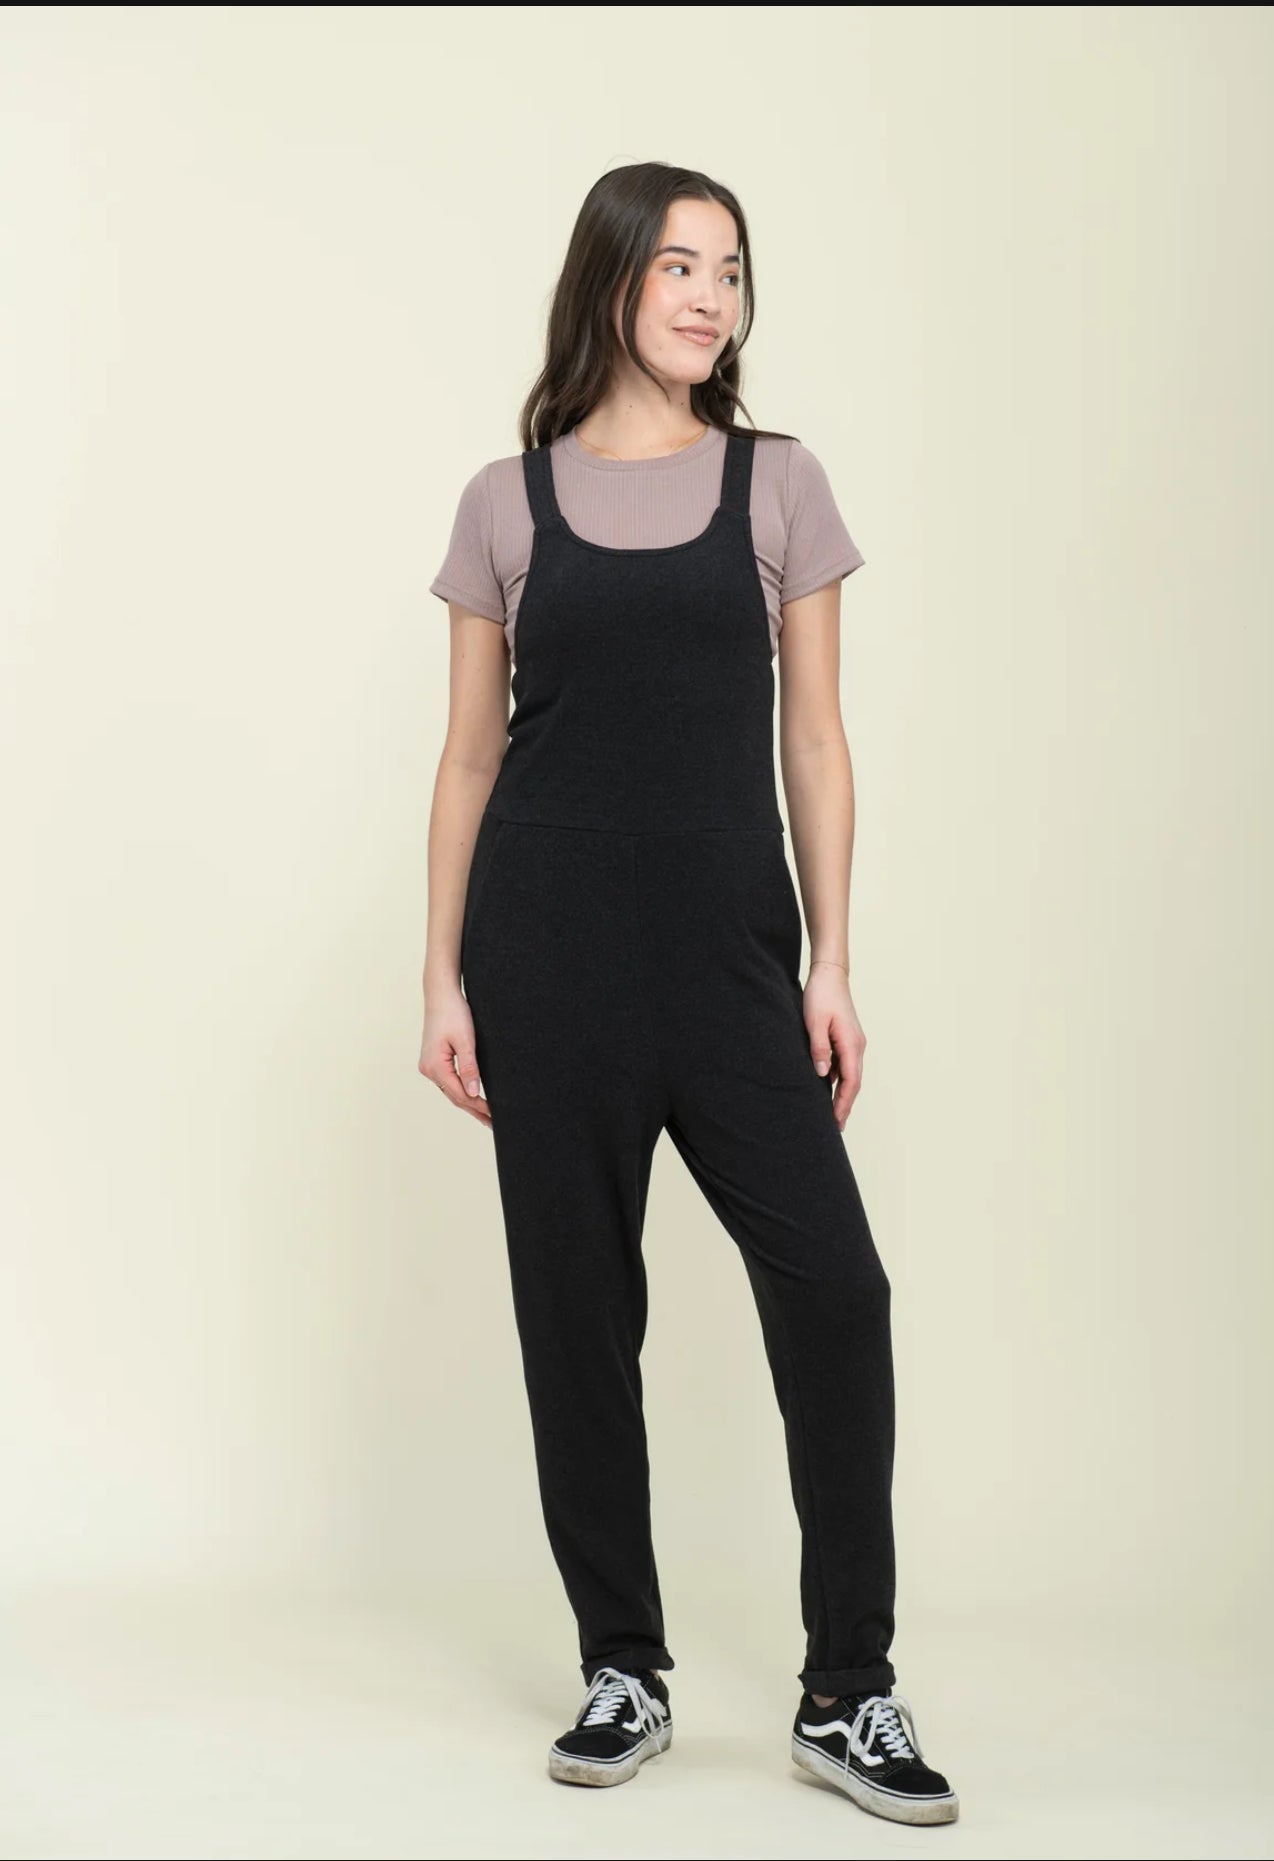 Kay brushed jersey overalls by Orb - Black - Blue Sky Fashions & Lingerie